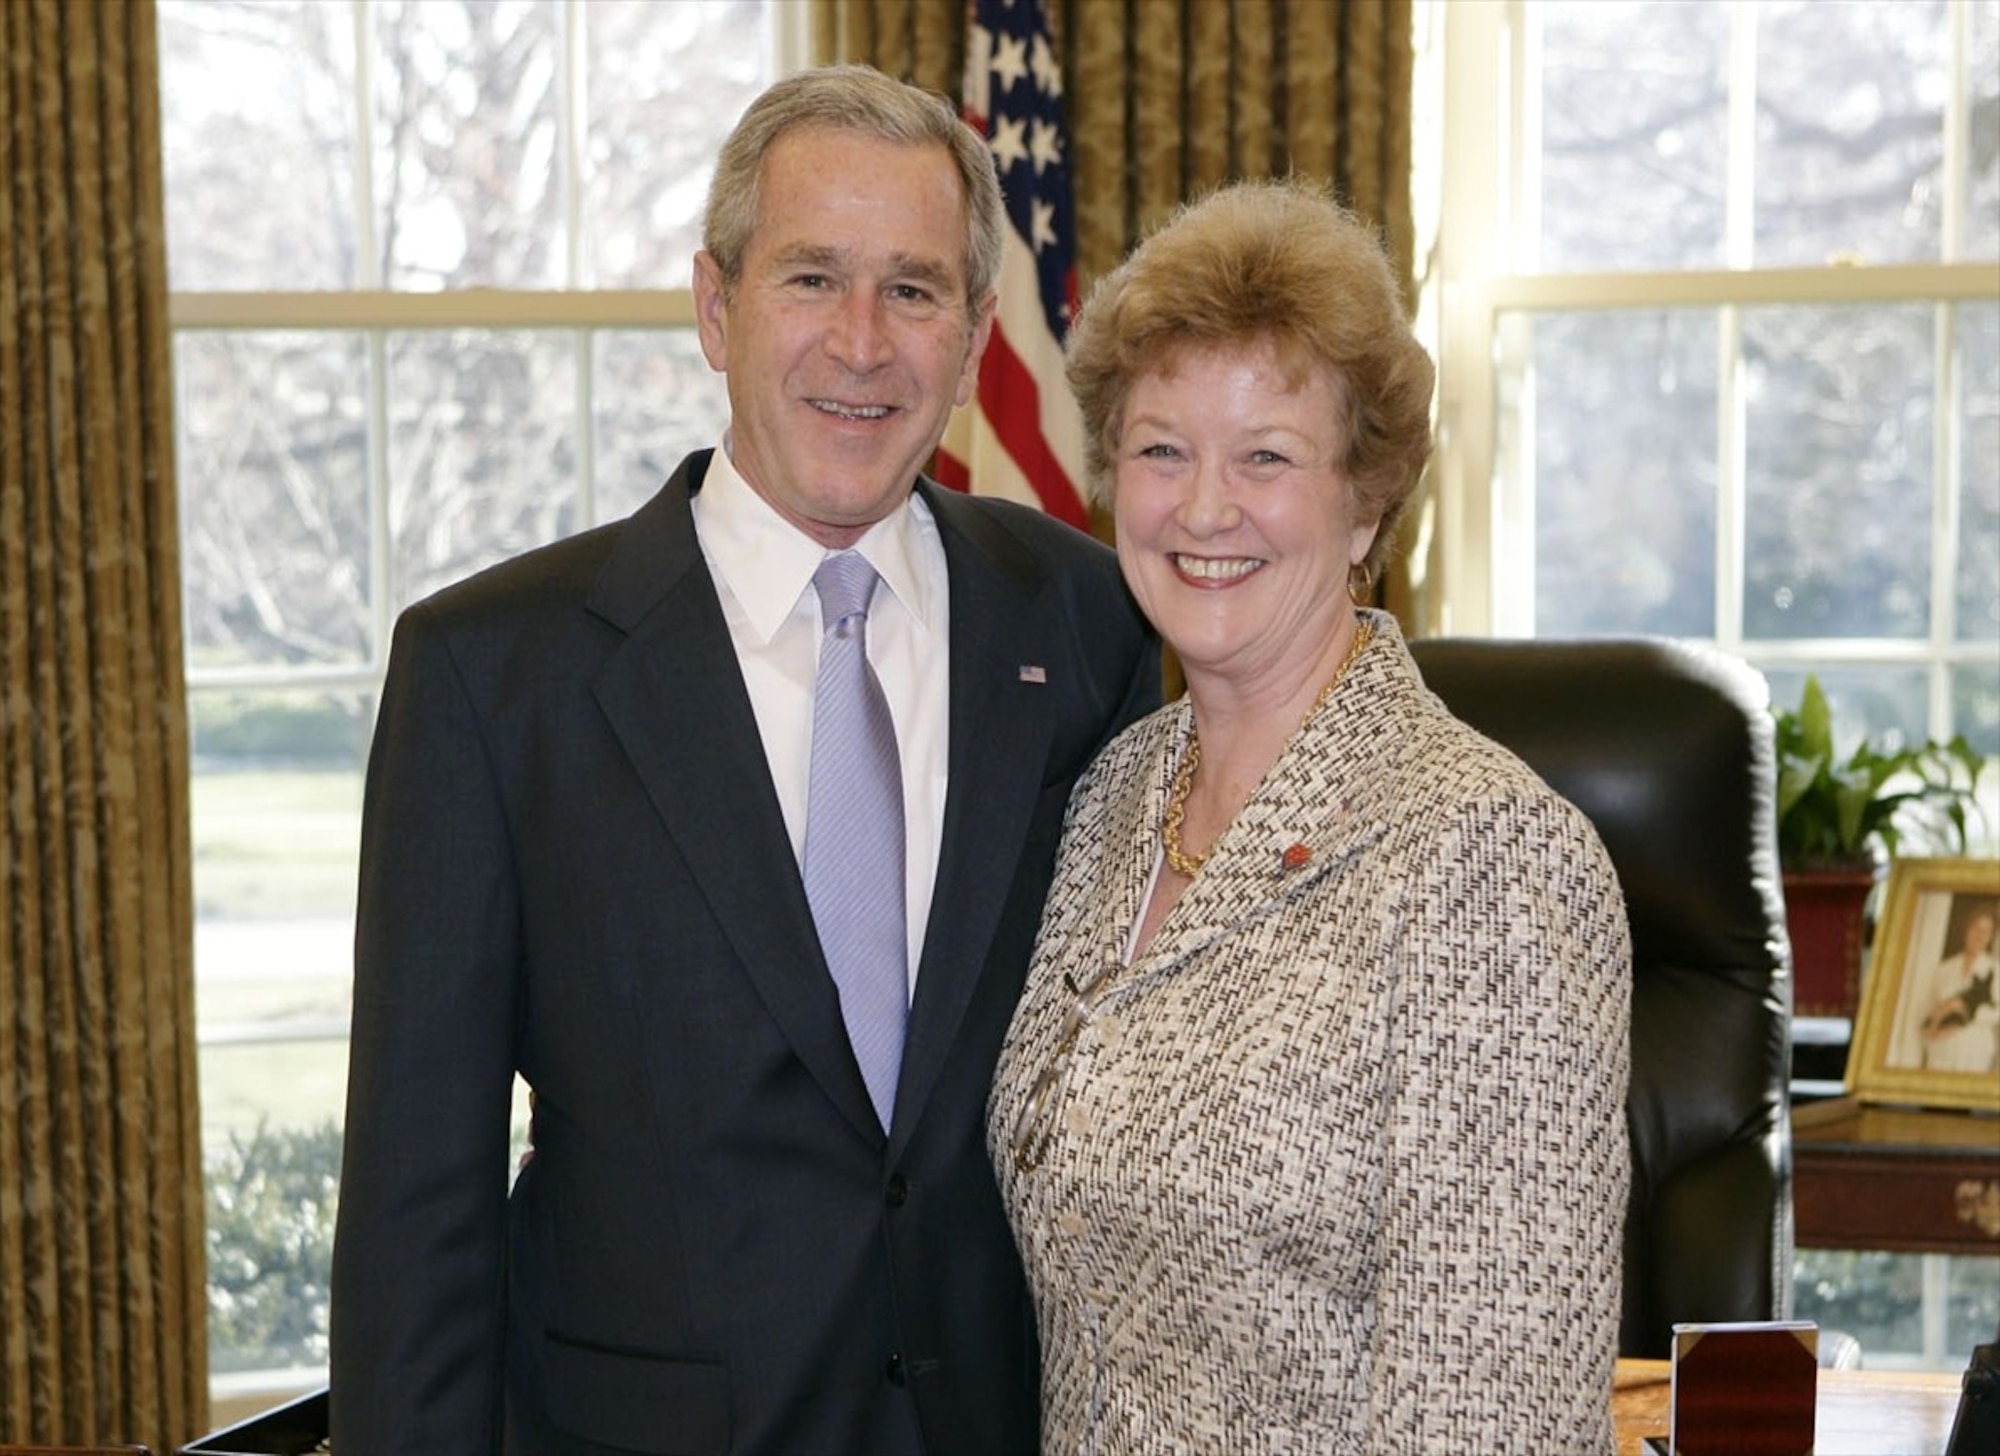 Gail VanVranken, the driving force of Boatsie’s Boxes, meets with President George Bush at the White House. (Courtesy photo) 